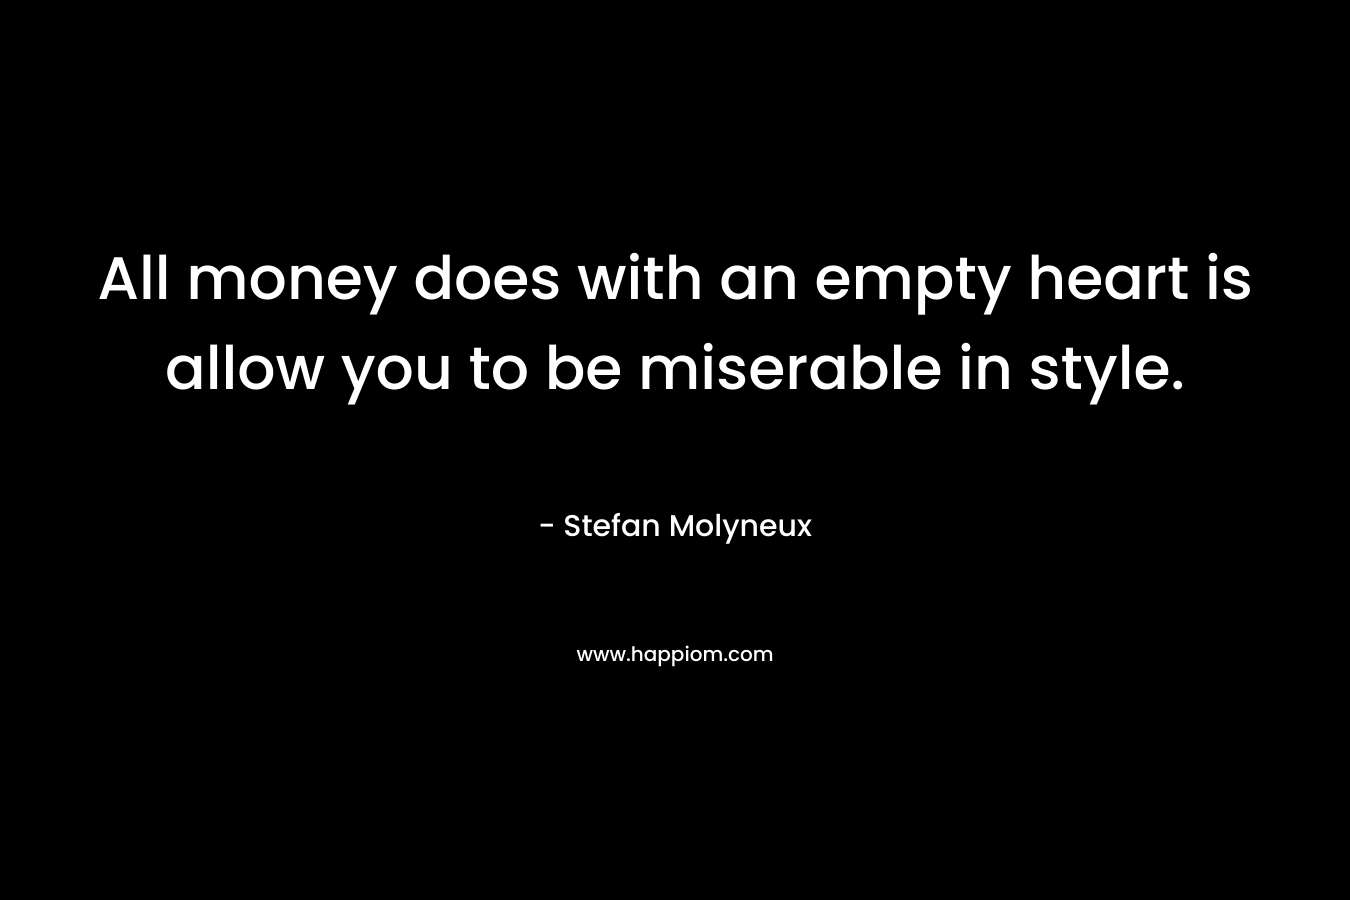 All money does with an empty heart is allow you to be miserable in style.